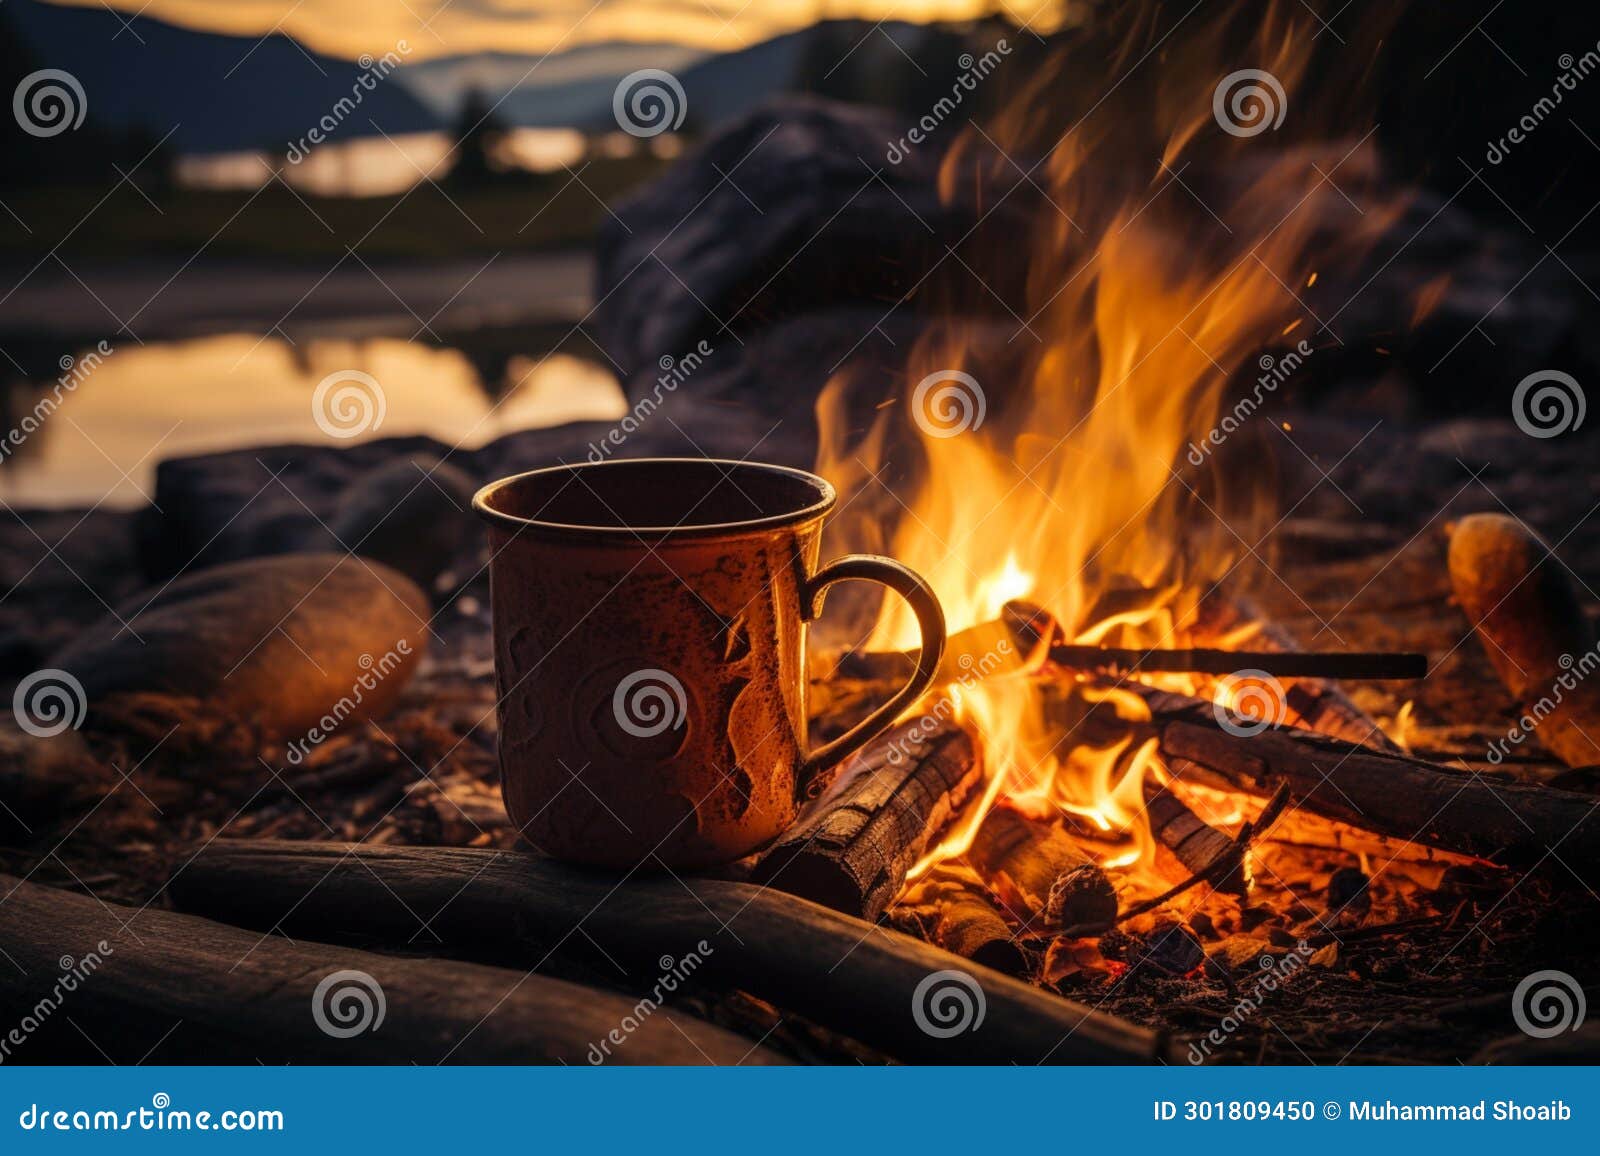 inviting coffee in norways wilderness, bathed in campfires golden light